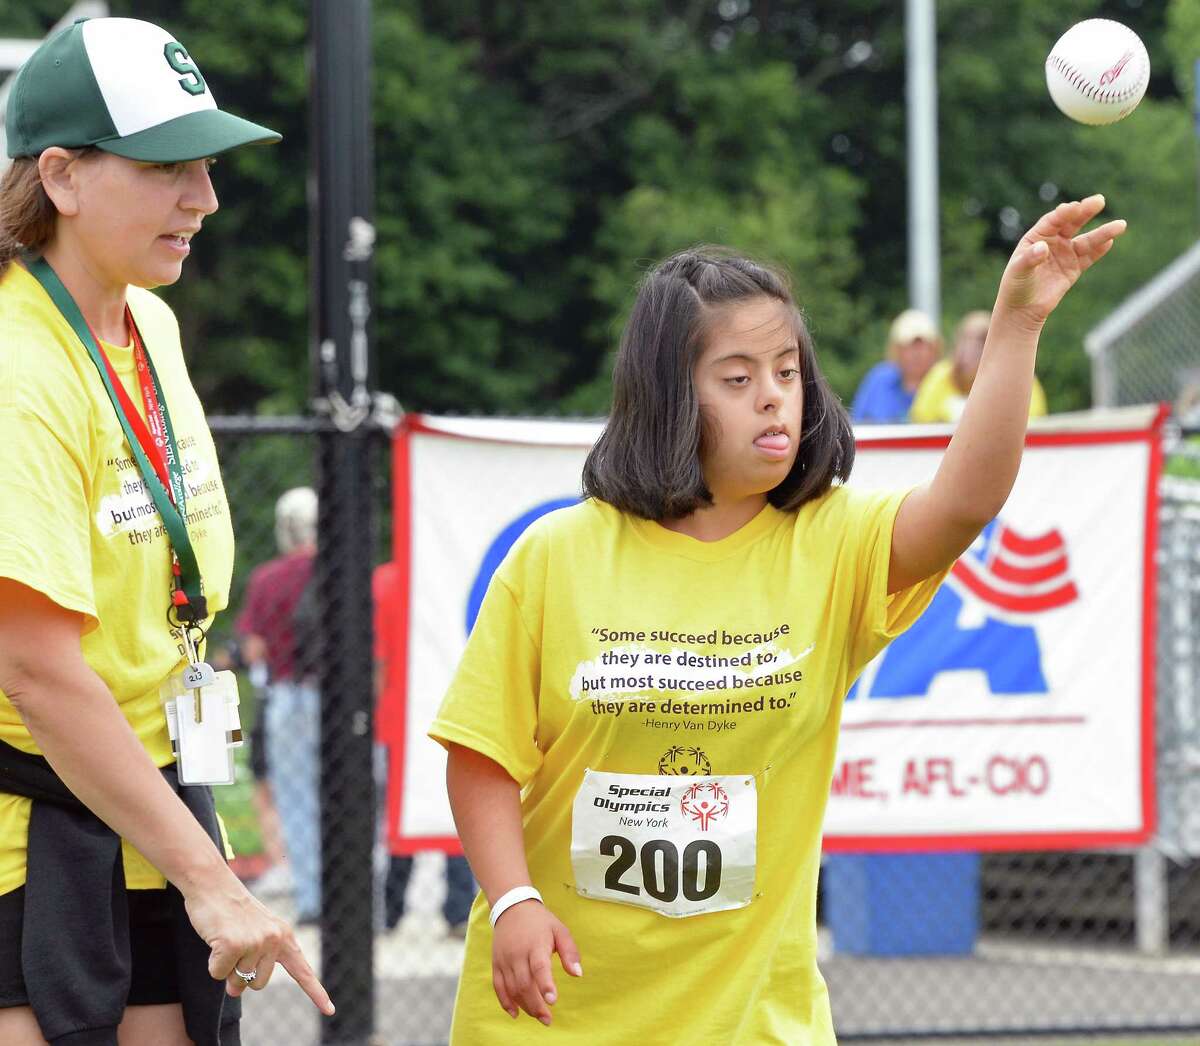 Coach Kristy LaMonda, left, helps Juliana Figueroa, 13, of East Hampton during the softball throw at the Special Olympics New York at Hudson Valley Community College Saturday June 17, 2017 in Troy, NY. (John Carl D'Annibale / Times Union)